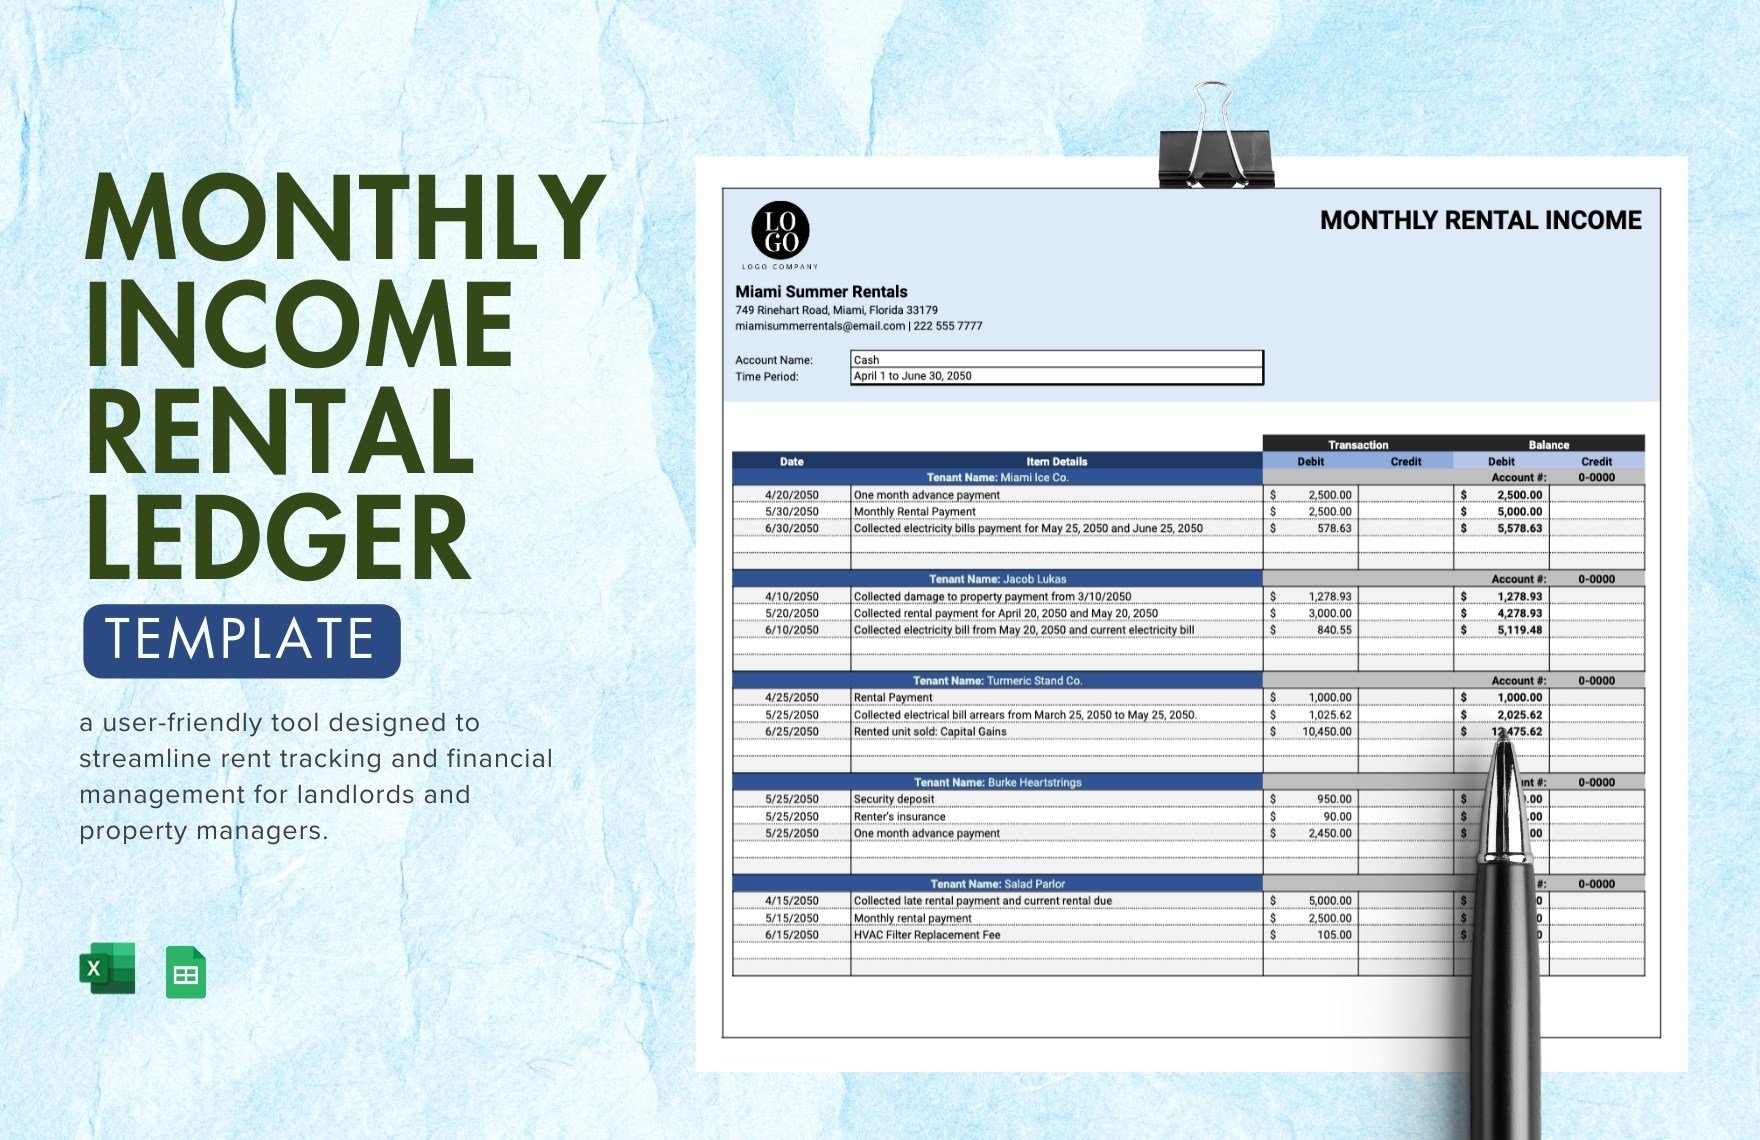 Monthly Rental Income Ledger Template